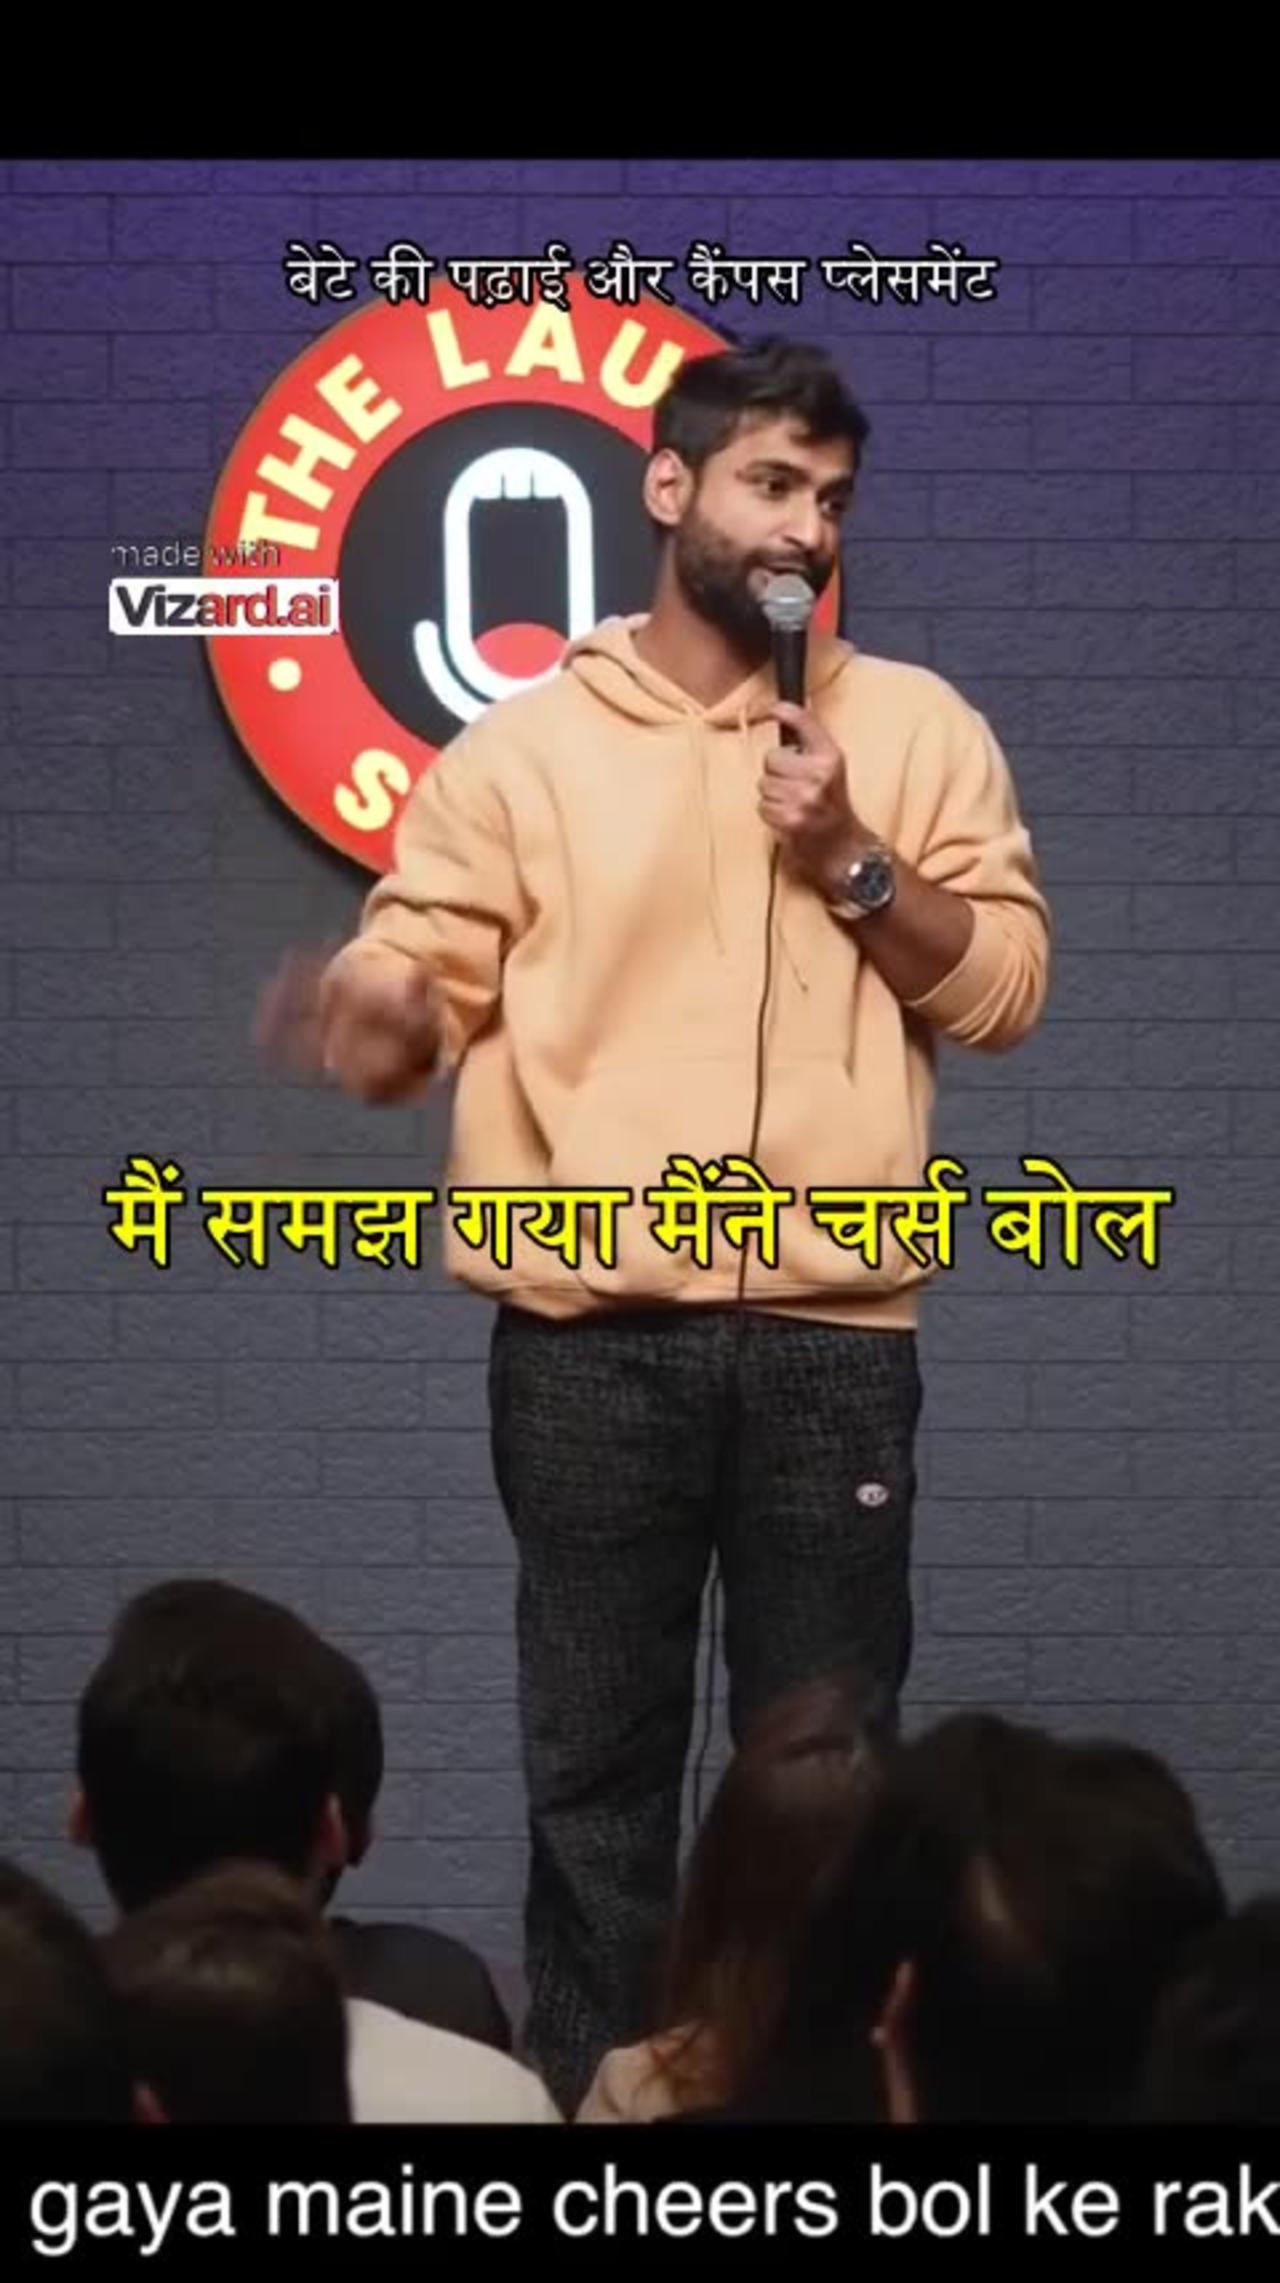 Harsh gujral comedy scene cut from video